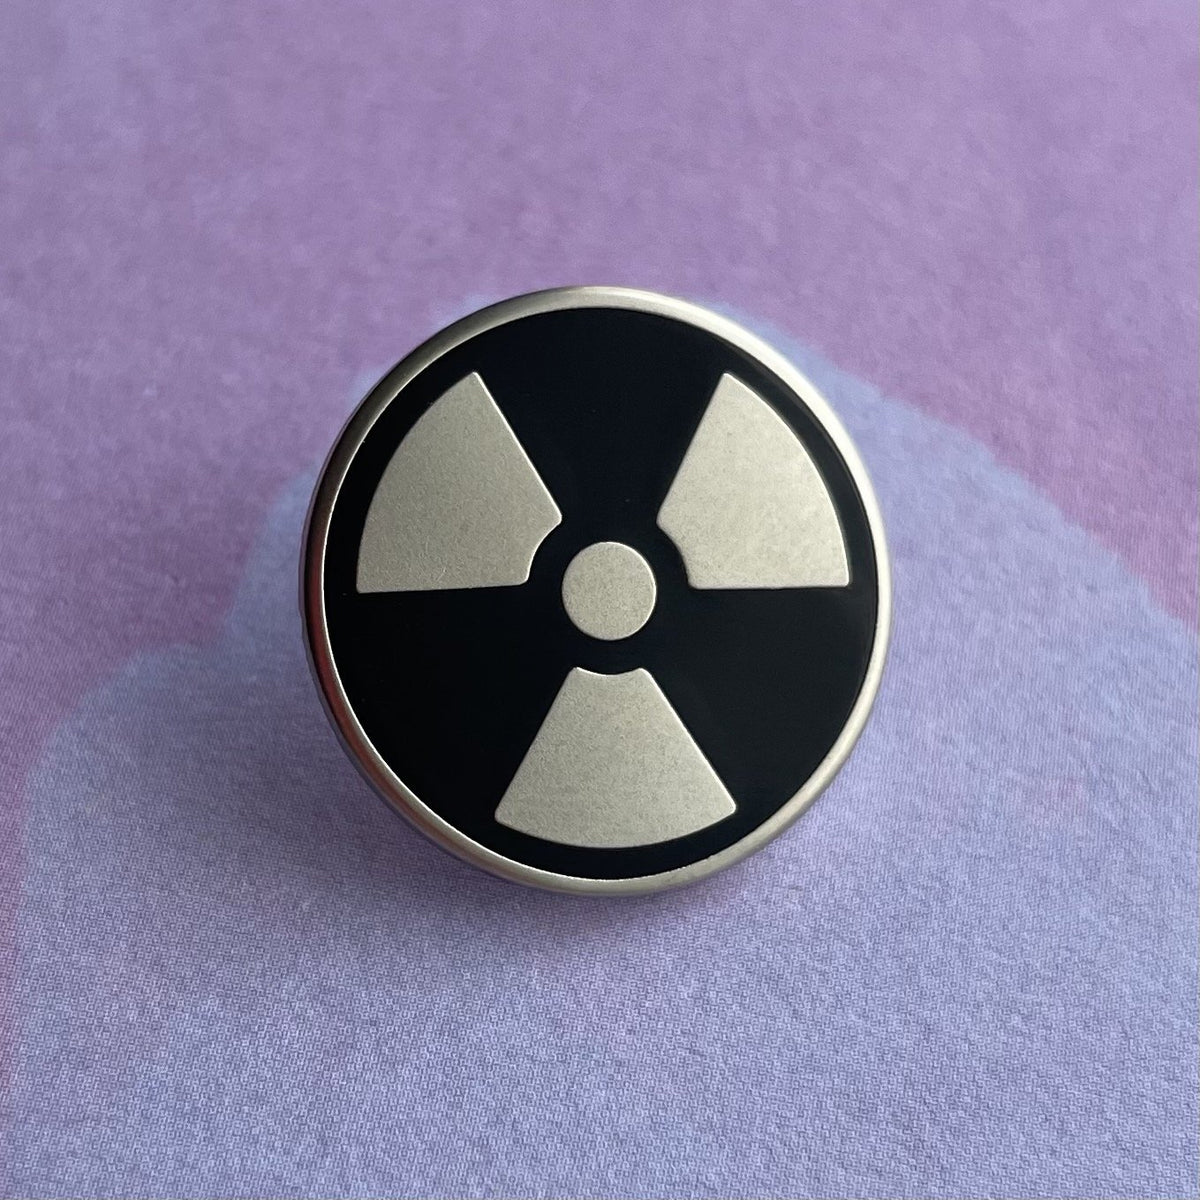 Nuclear Medicine Pin Pack - Rad Girl Creations